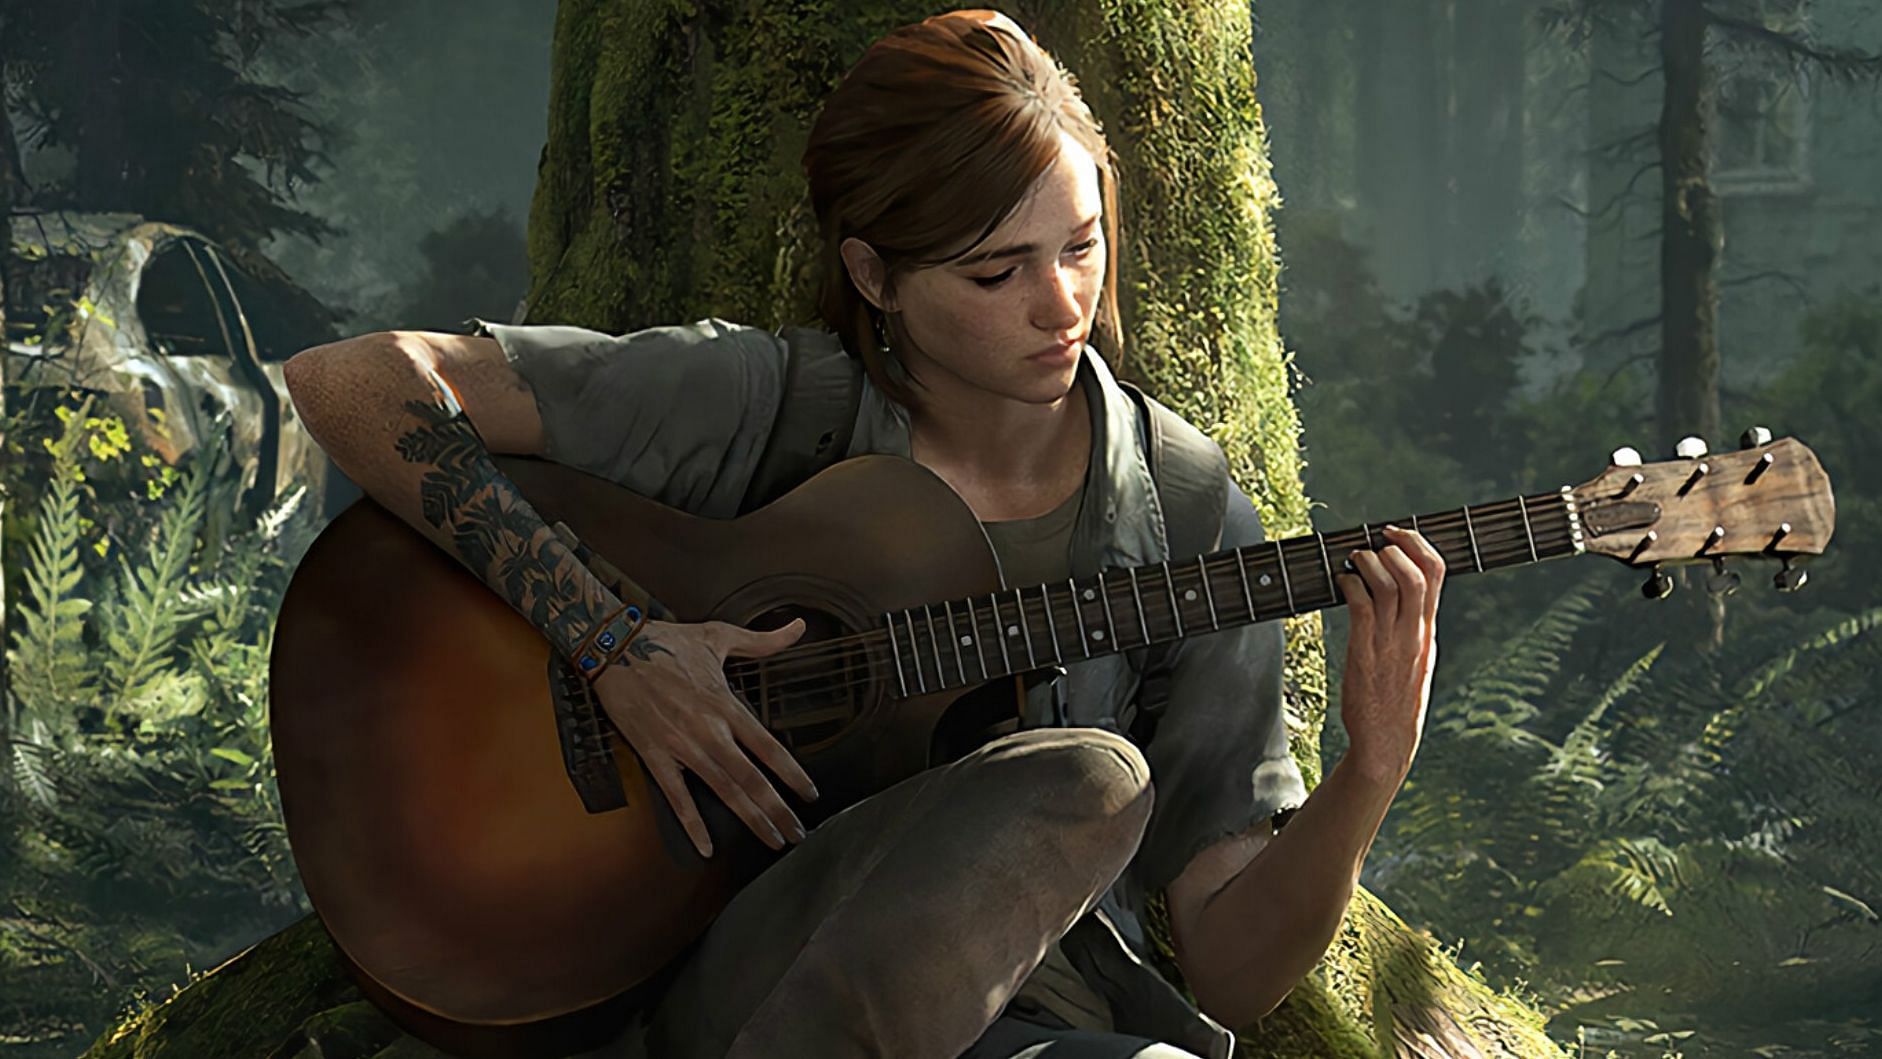 Ellie playing the guitar in The Last of Us: Part II (Image via Naughty Dog)